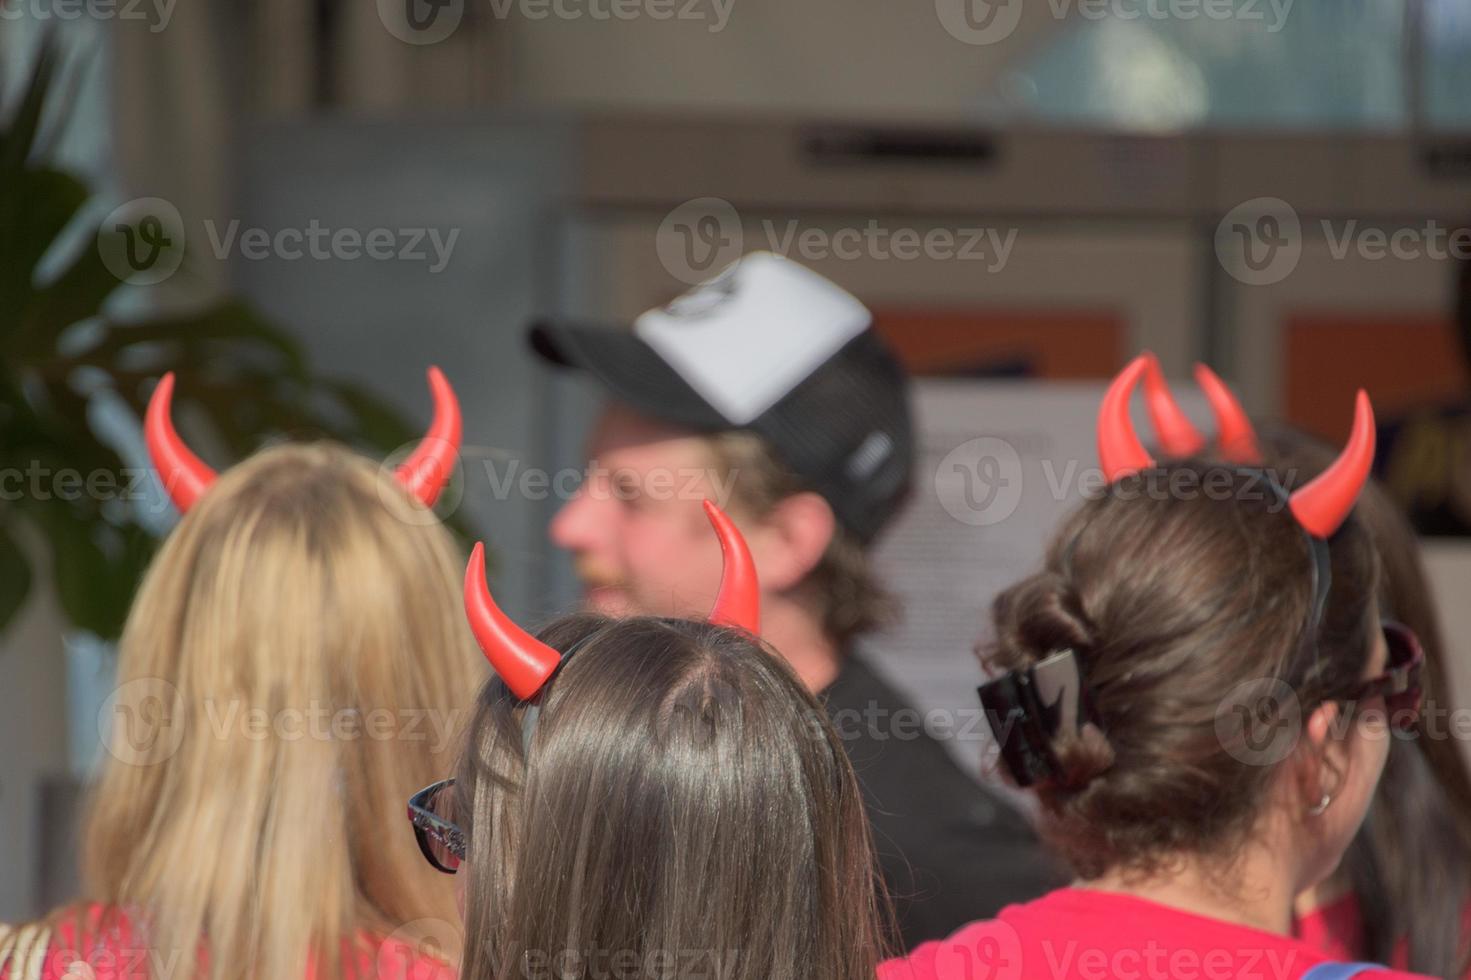 Red devil horns girl from the back photo